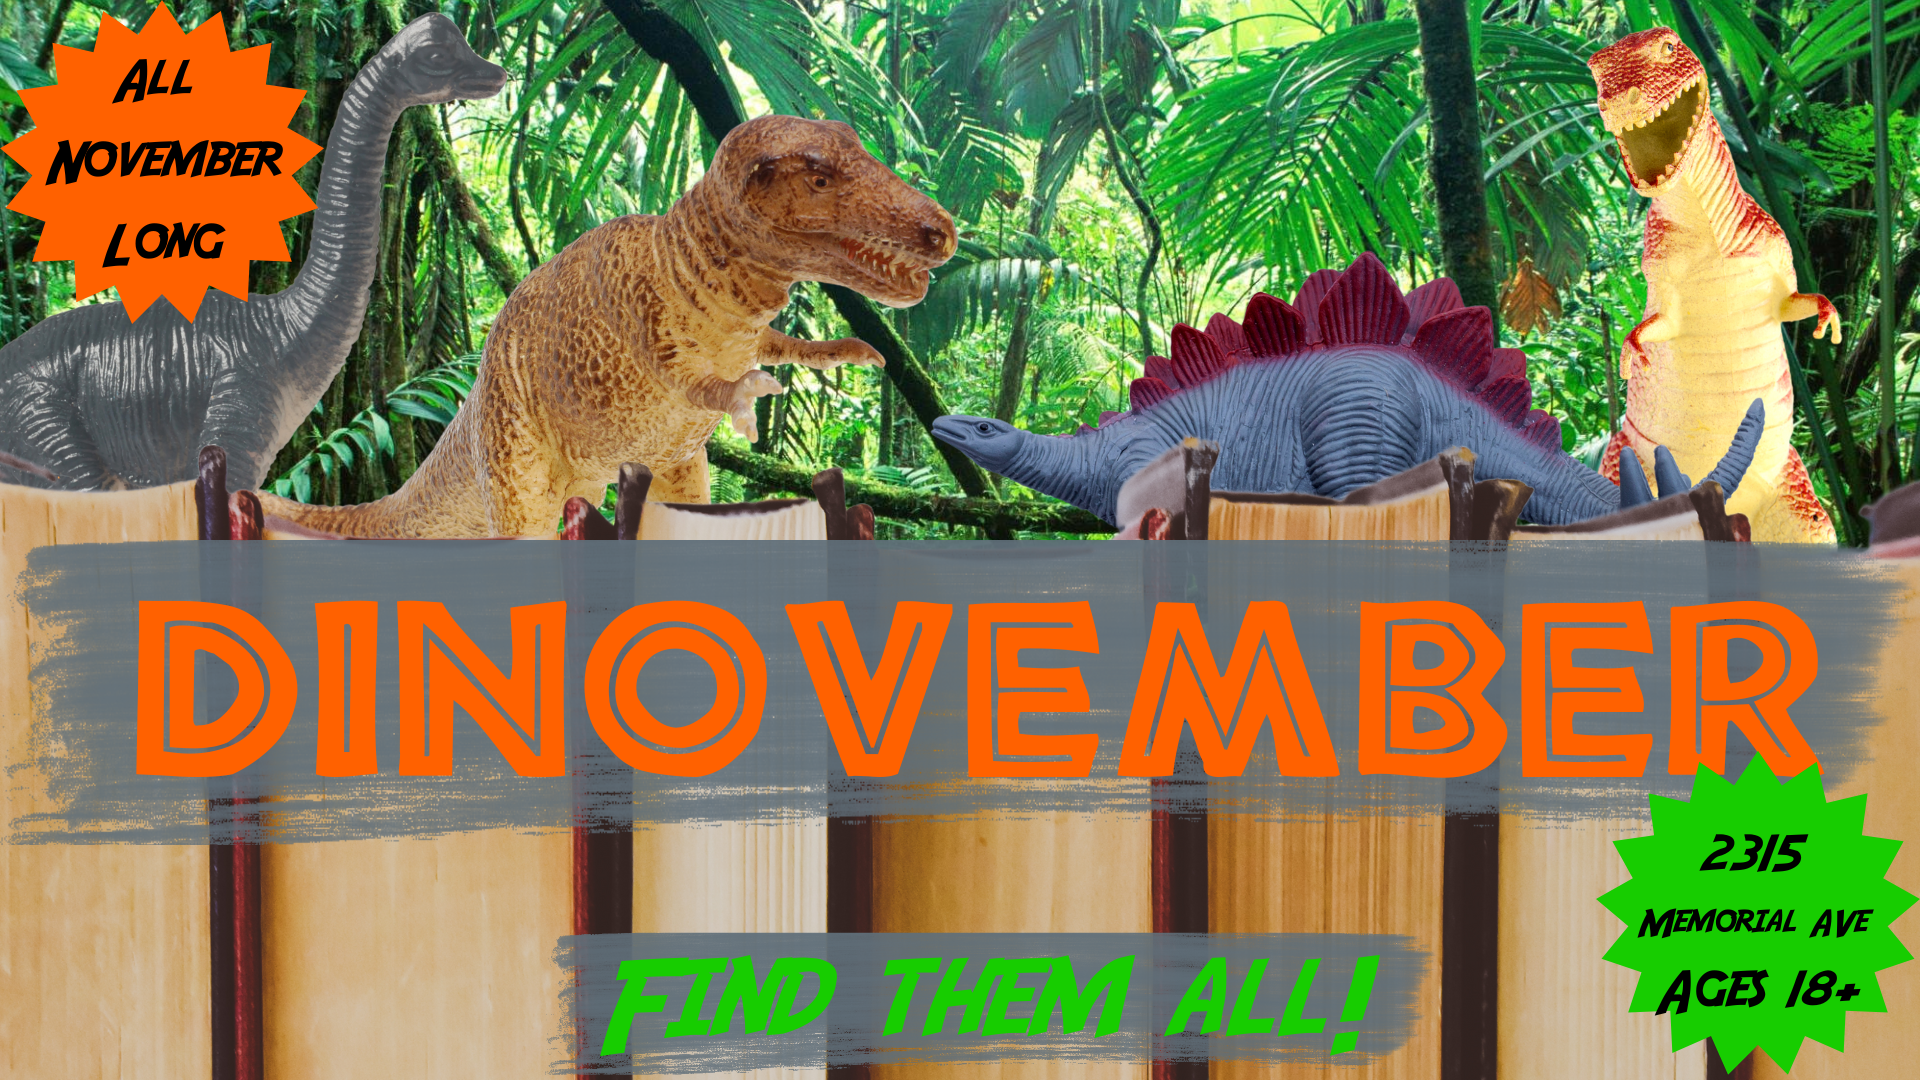 All November Long! Dinovember; Find them all! 2315 Memorial Ave; Ages 18+